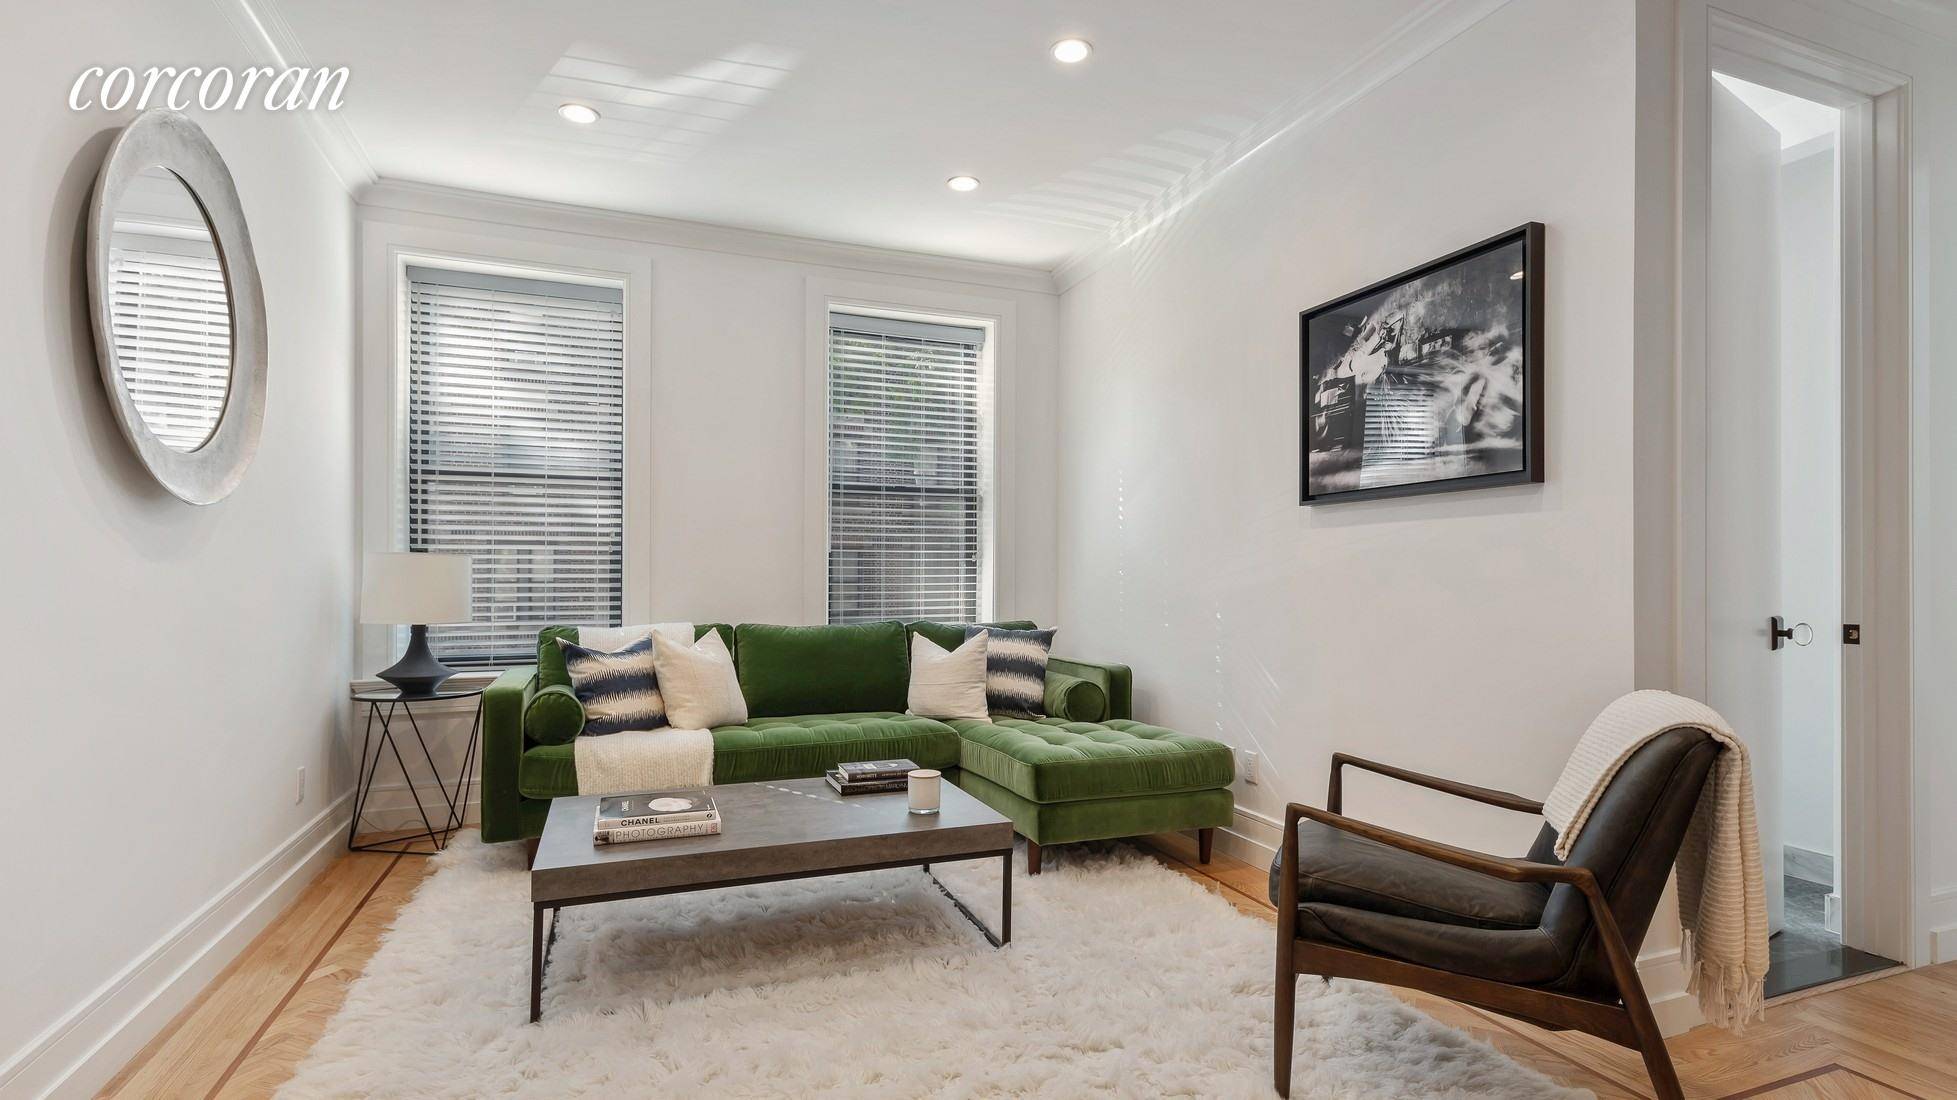 By Private or Virtual Appointment Only Presenting Astoria Lights A four completely renovated pre war co op buildings that have been reimagined and reinvigorated with open, loft style floor plans, ...